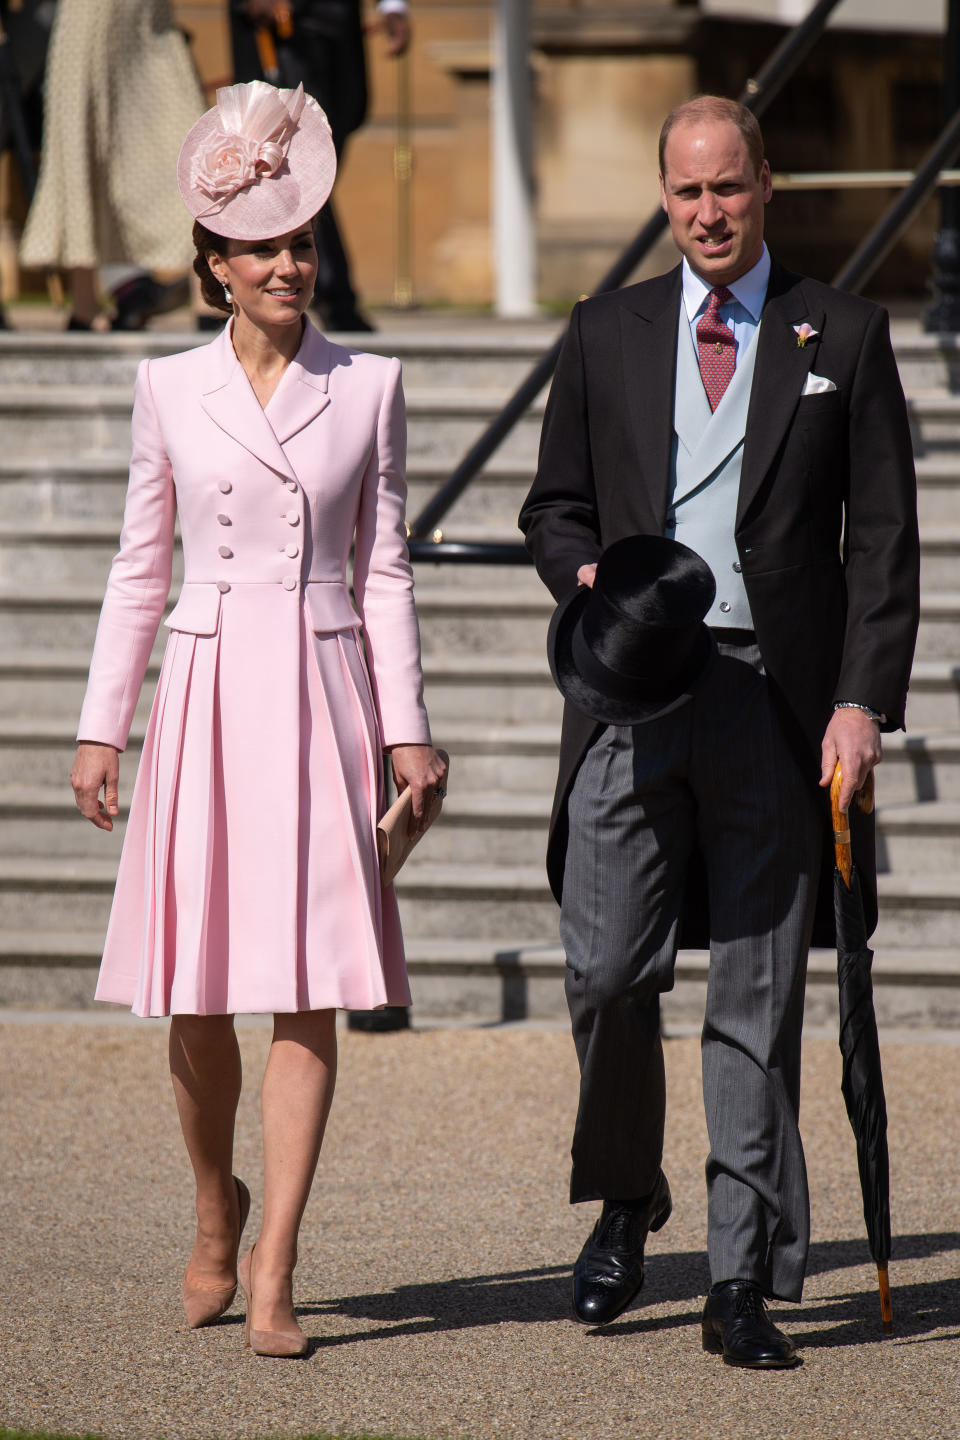 LONDON, ENGLAND - MAY 21: Prince William and Catherine, Duchess of Cambridge attending the Royal Garden Party at Buckingham Palace on May 21, 2019 in London, England. (Photo by Dominic Lipinski - WPA Pool/Getty Images)